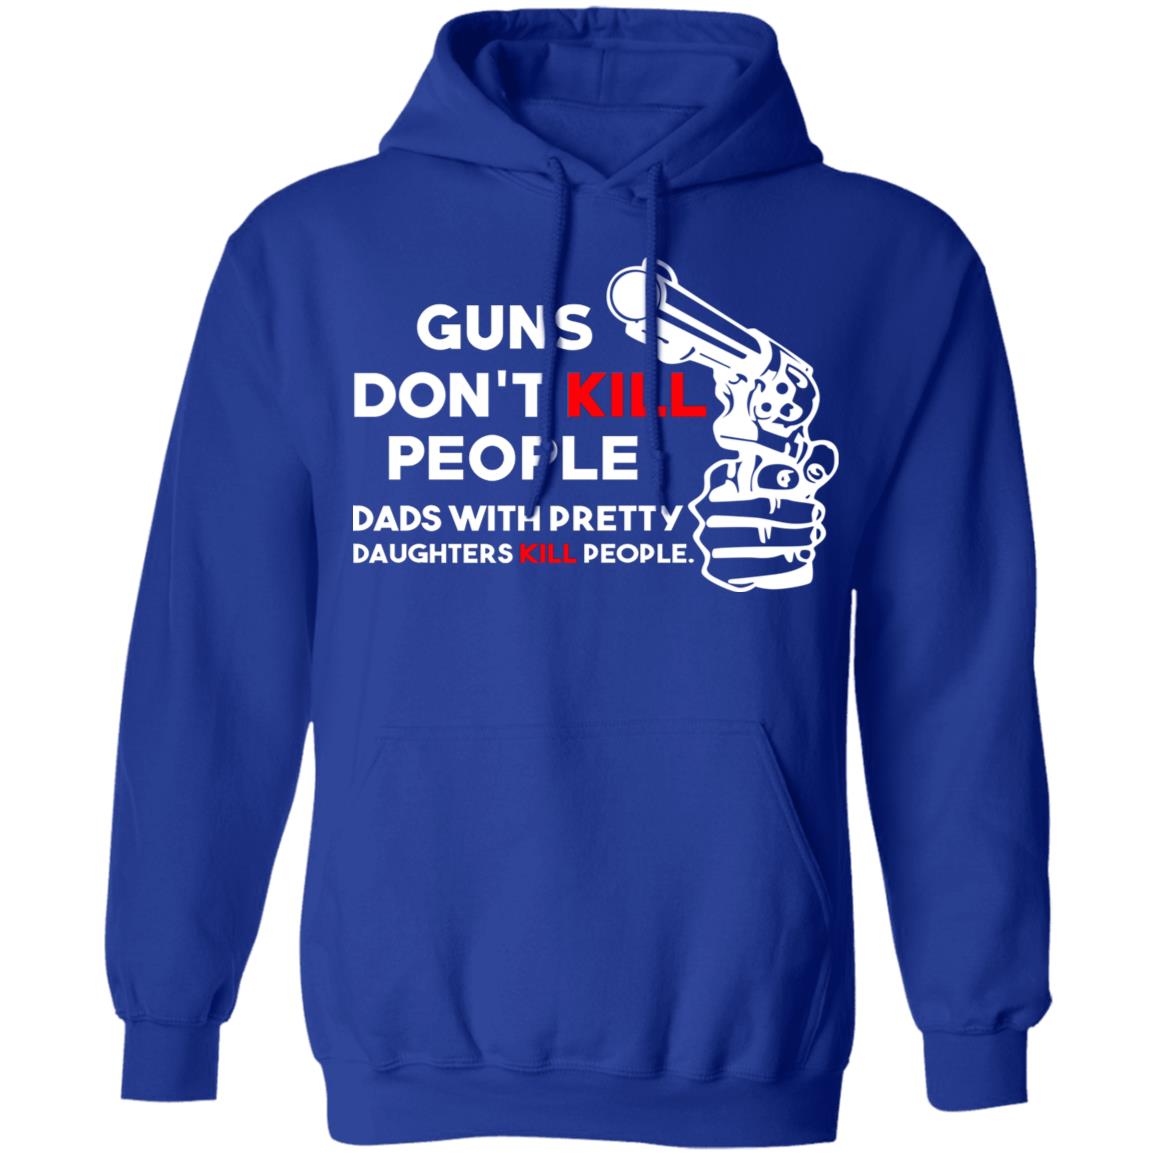 Meteorologists with Pretty Daughters Do Hoodie Uncensored Shirts Guns Dont Kill People